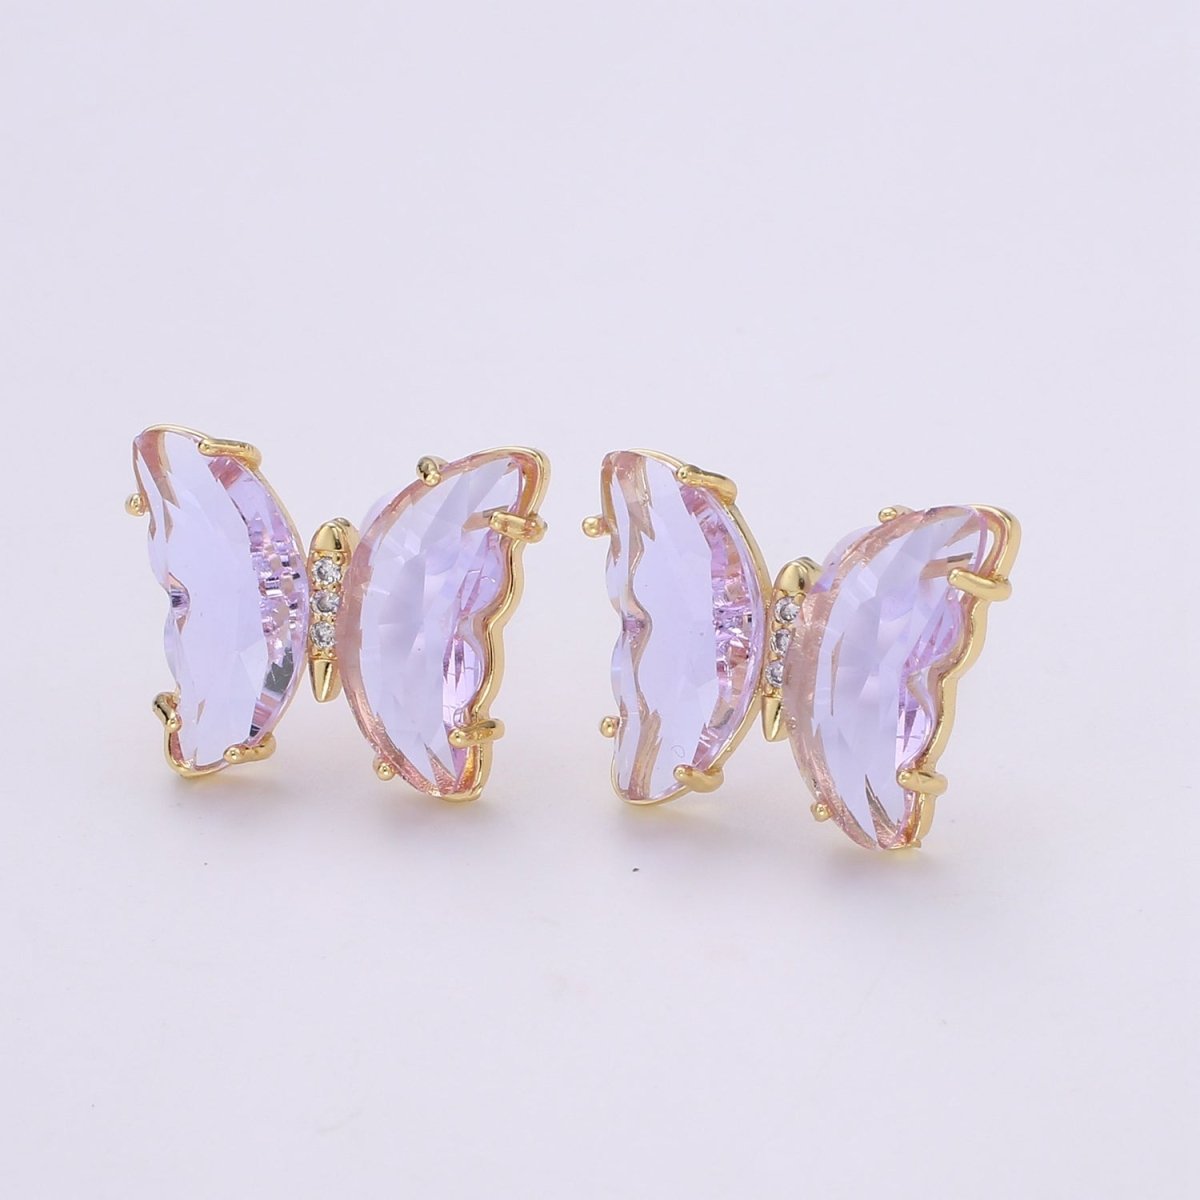 Gold Mariposa Stud Earring Minimalist butterfly earrings Lead and nickels free Acrylics mariposa Stud Earring Clear Colorful Jewelry Q-328 - Q-335 - DLUXCA